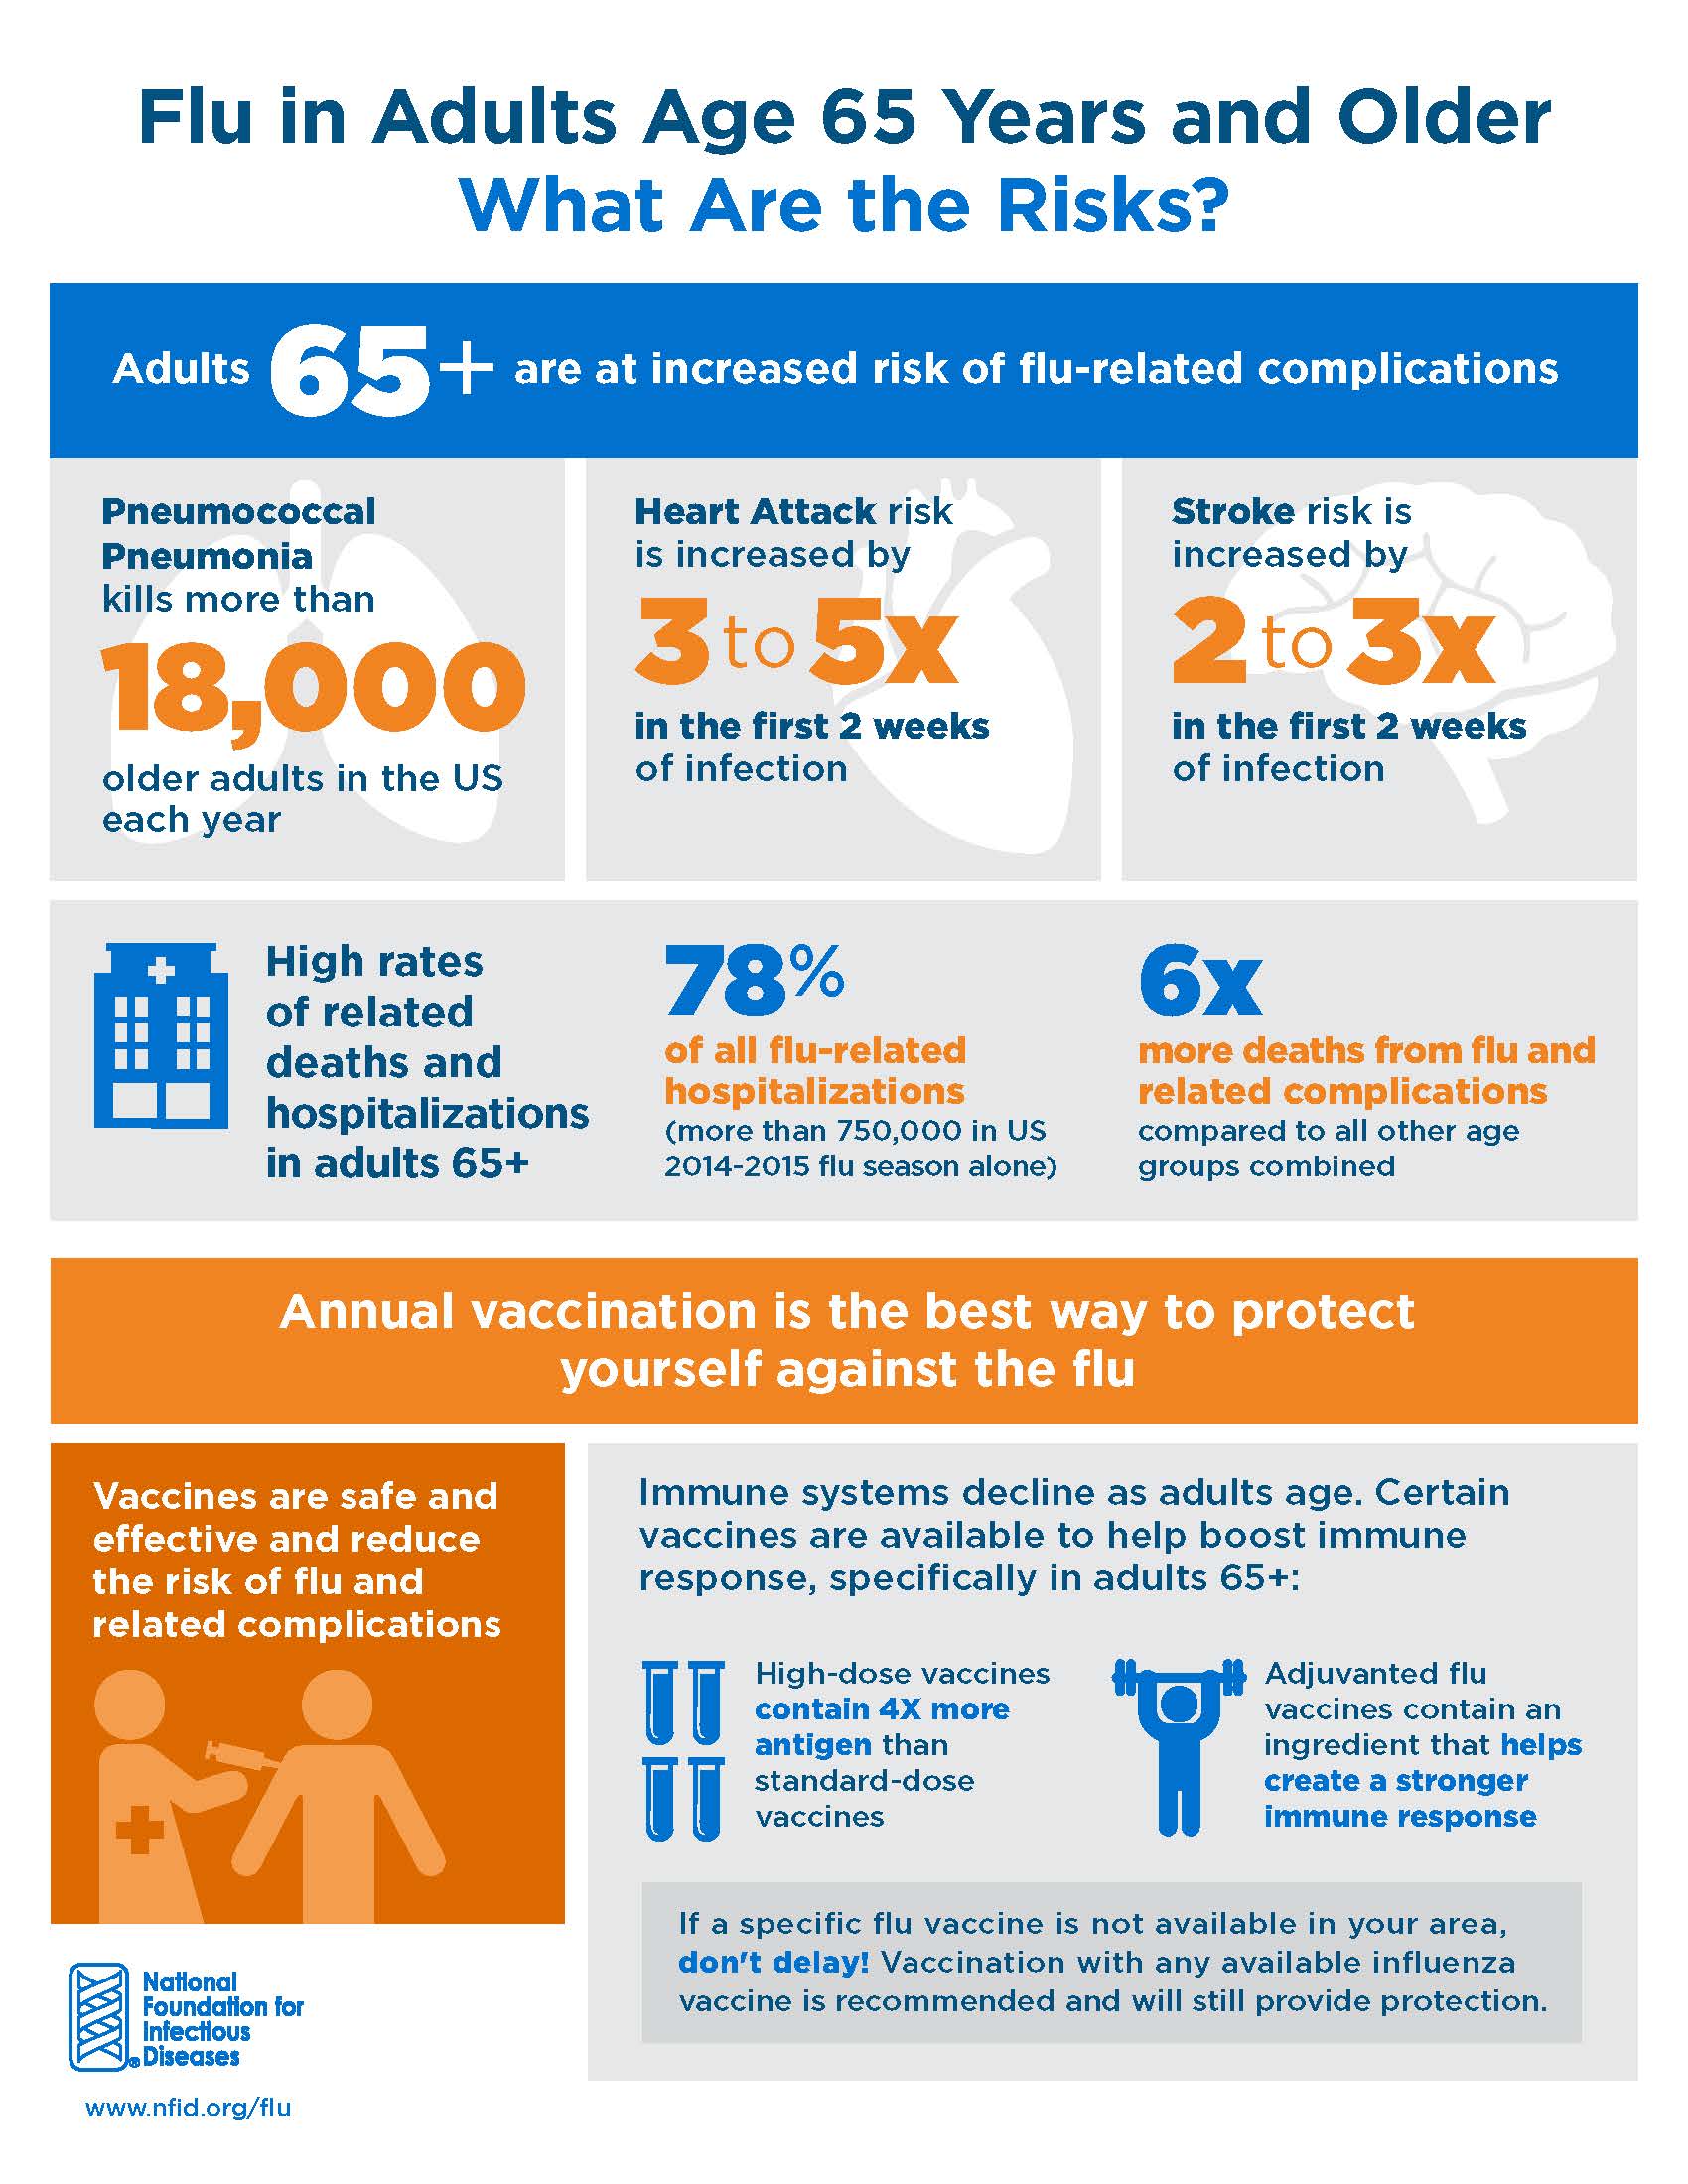 Orange and blue graphic containing facts about the flu in adults age 65 years and older. The facts include an overview of flu-related complications, information on high rates of related deaths and hospitalizations, and information about the protection provided by the flu vaccine.